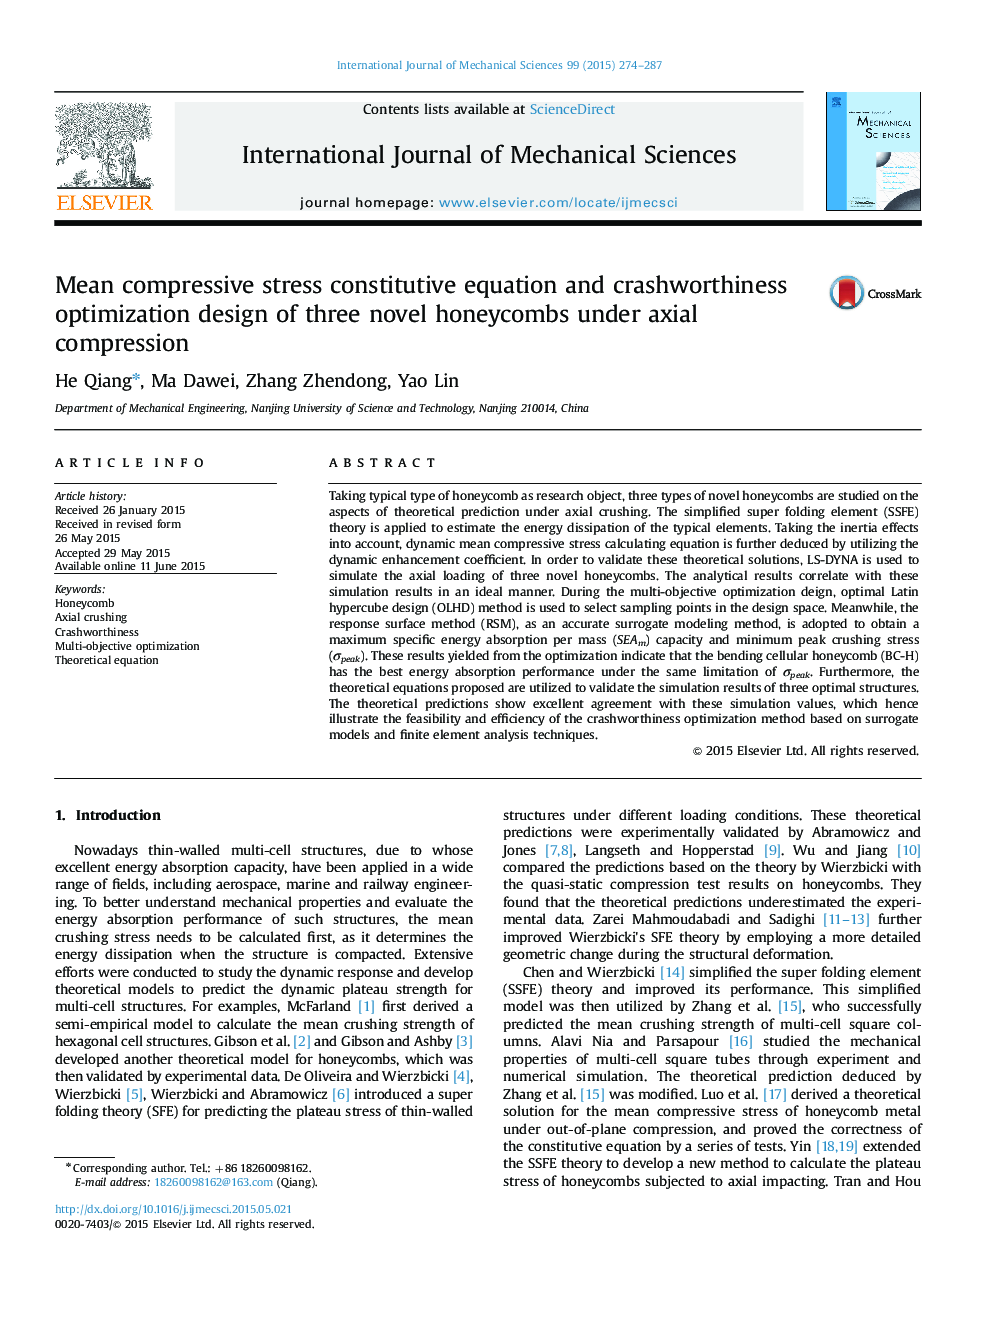 Mean compressive stress constitutive equation and crashworthiness optimization design of three novel honeycombs under axial compression